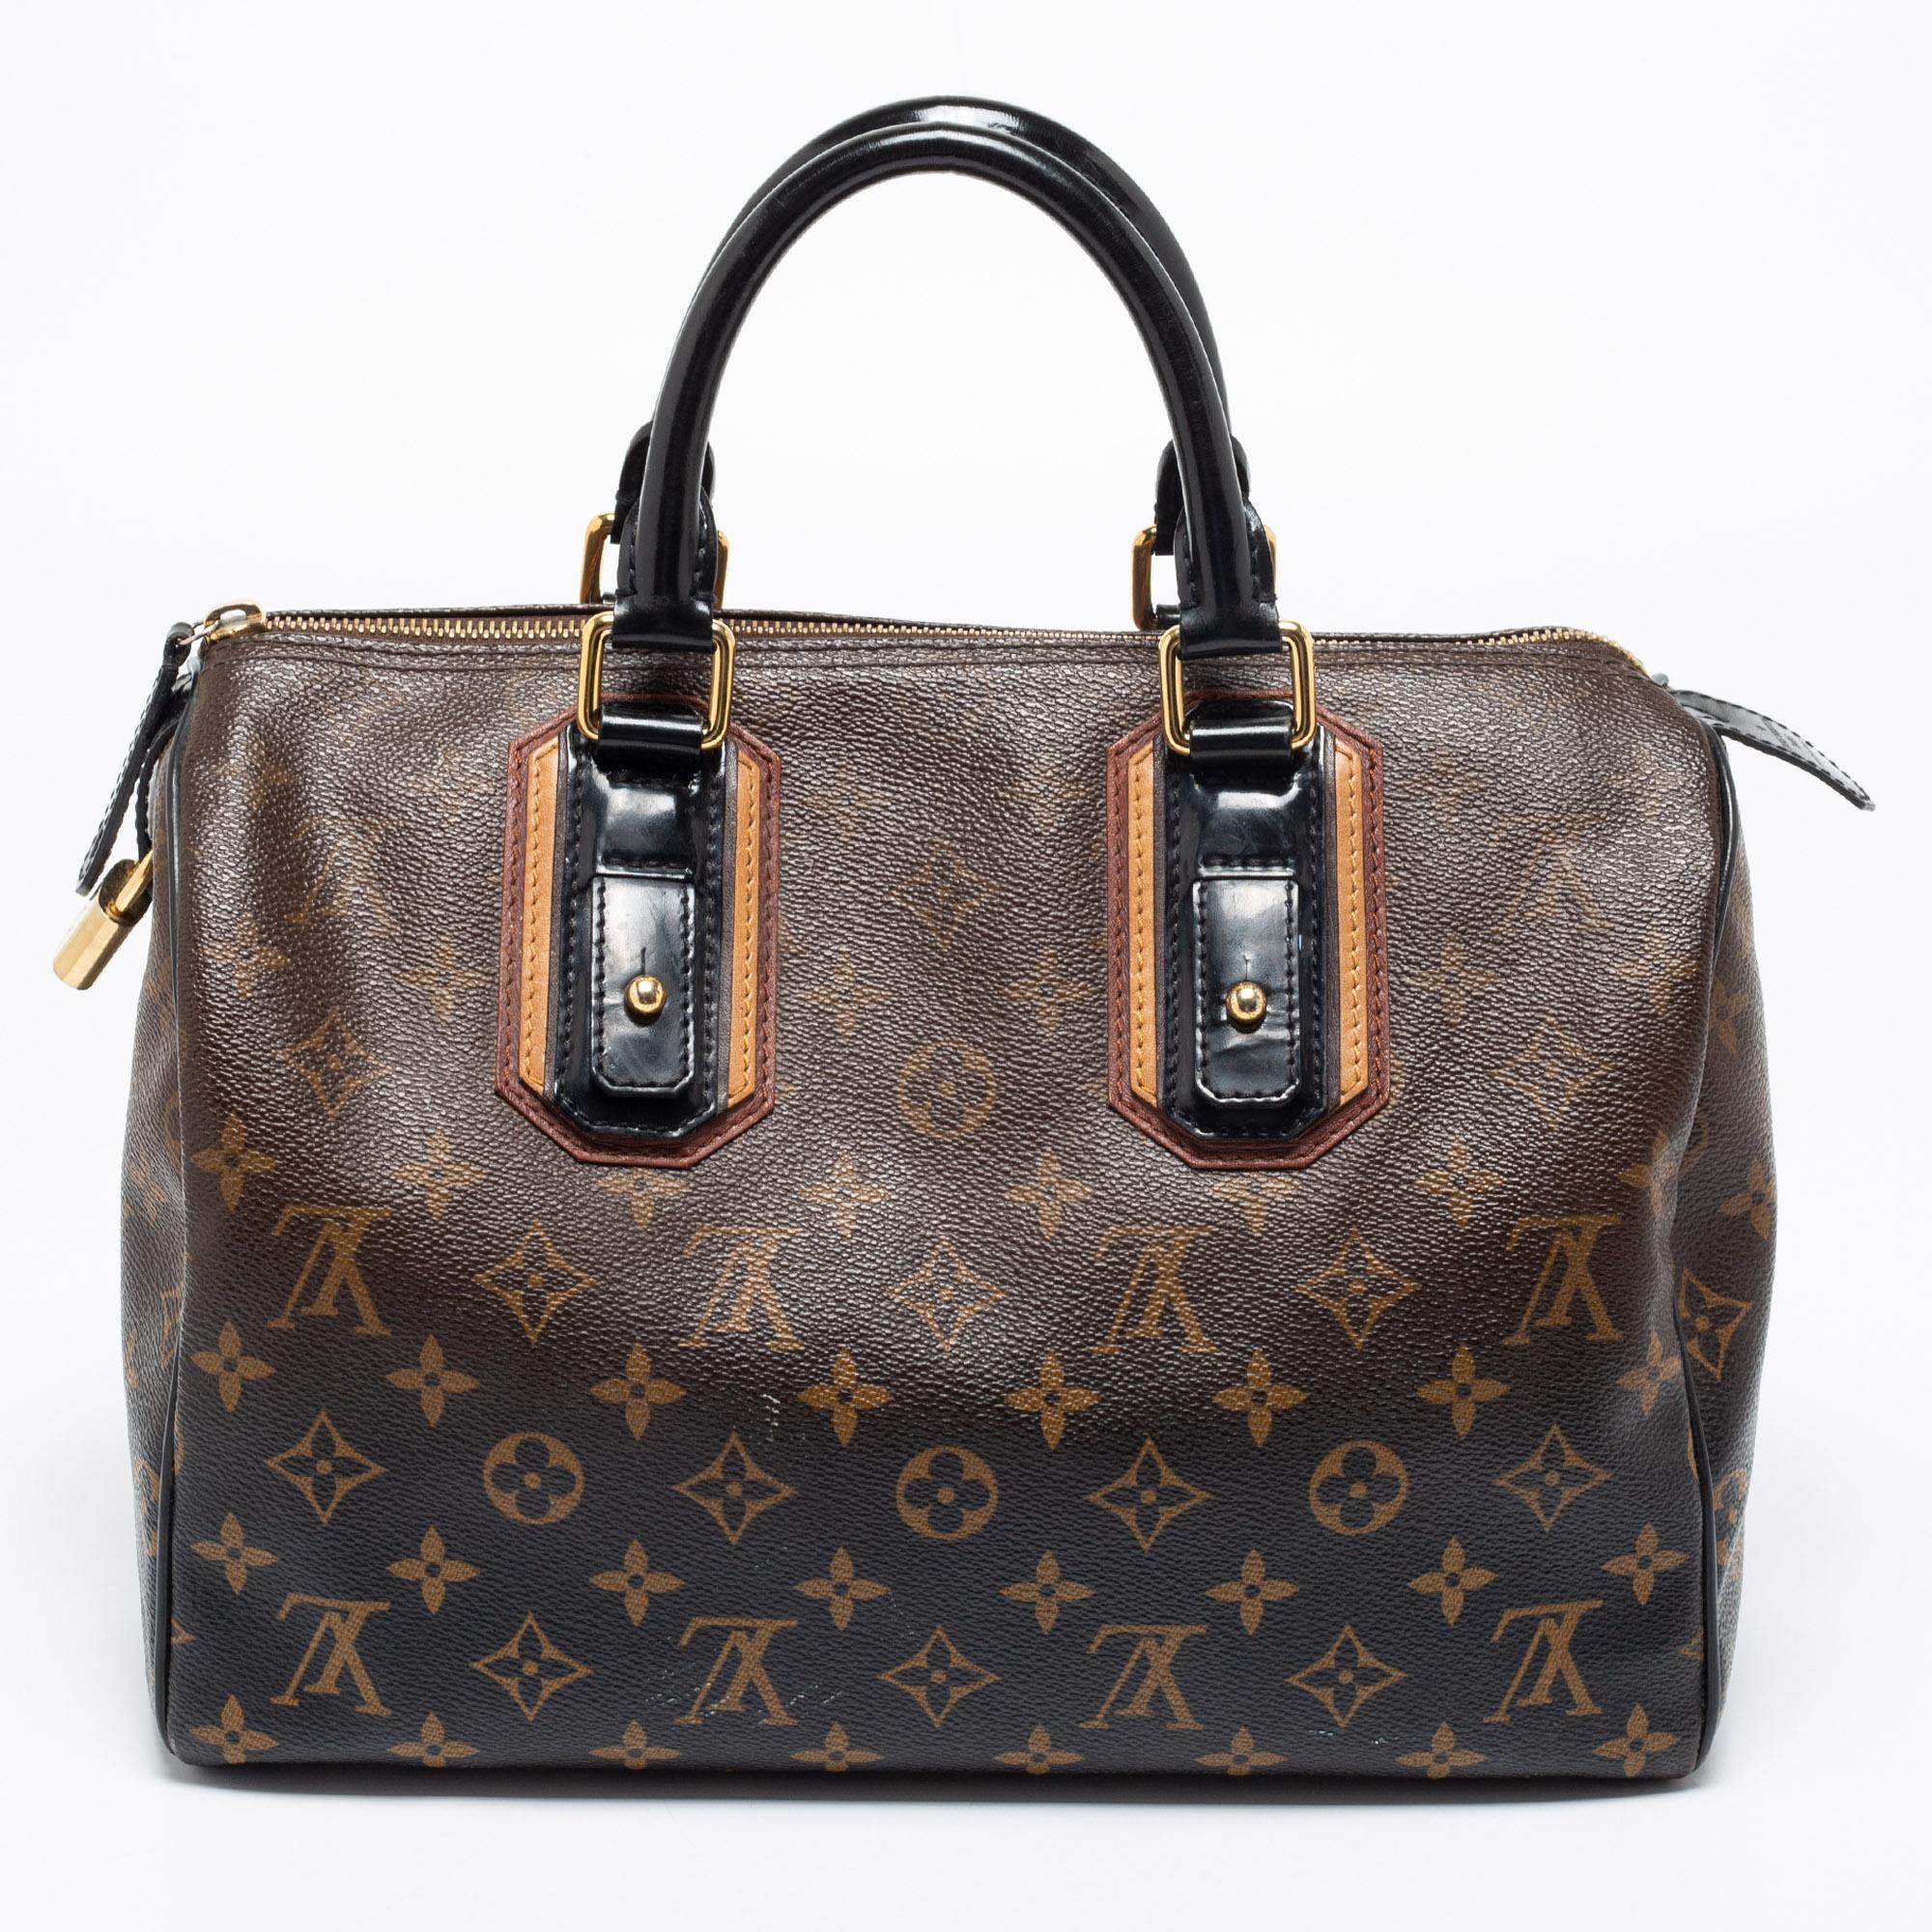 This Louis Vuitton Speedy 30 bag comes crafted from Monogram canvas flaunting two handles and a top zipper that leads to a spacious Alcantara interior. A true classic in shape and design, this bag is a creation you will love!

Includes: Padlock